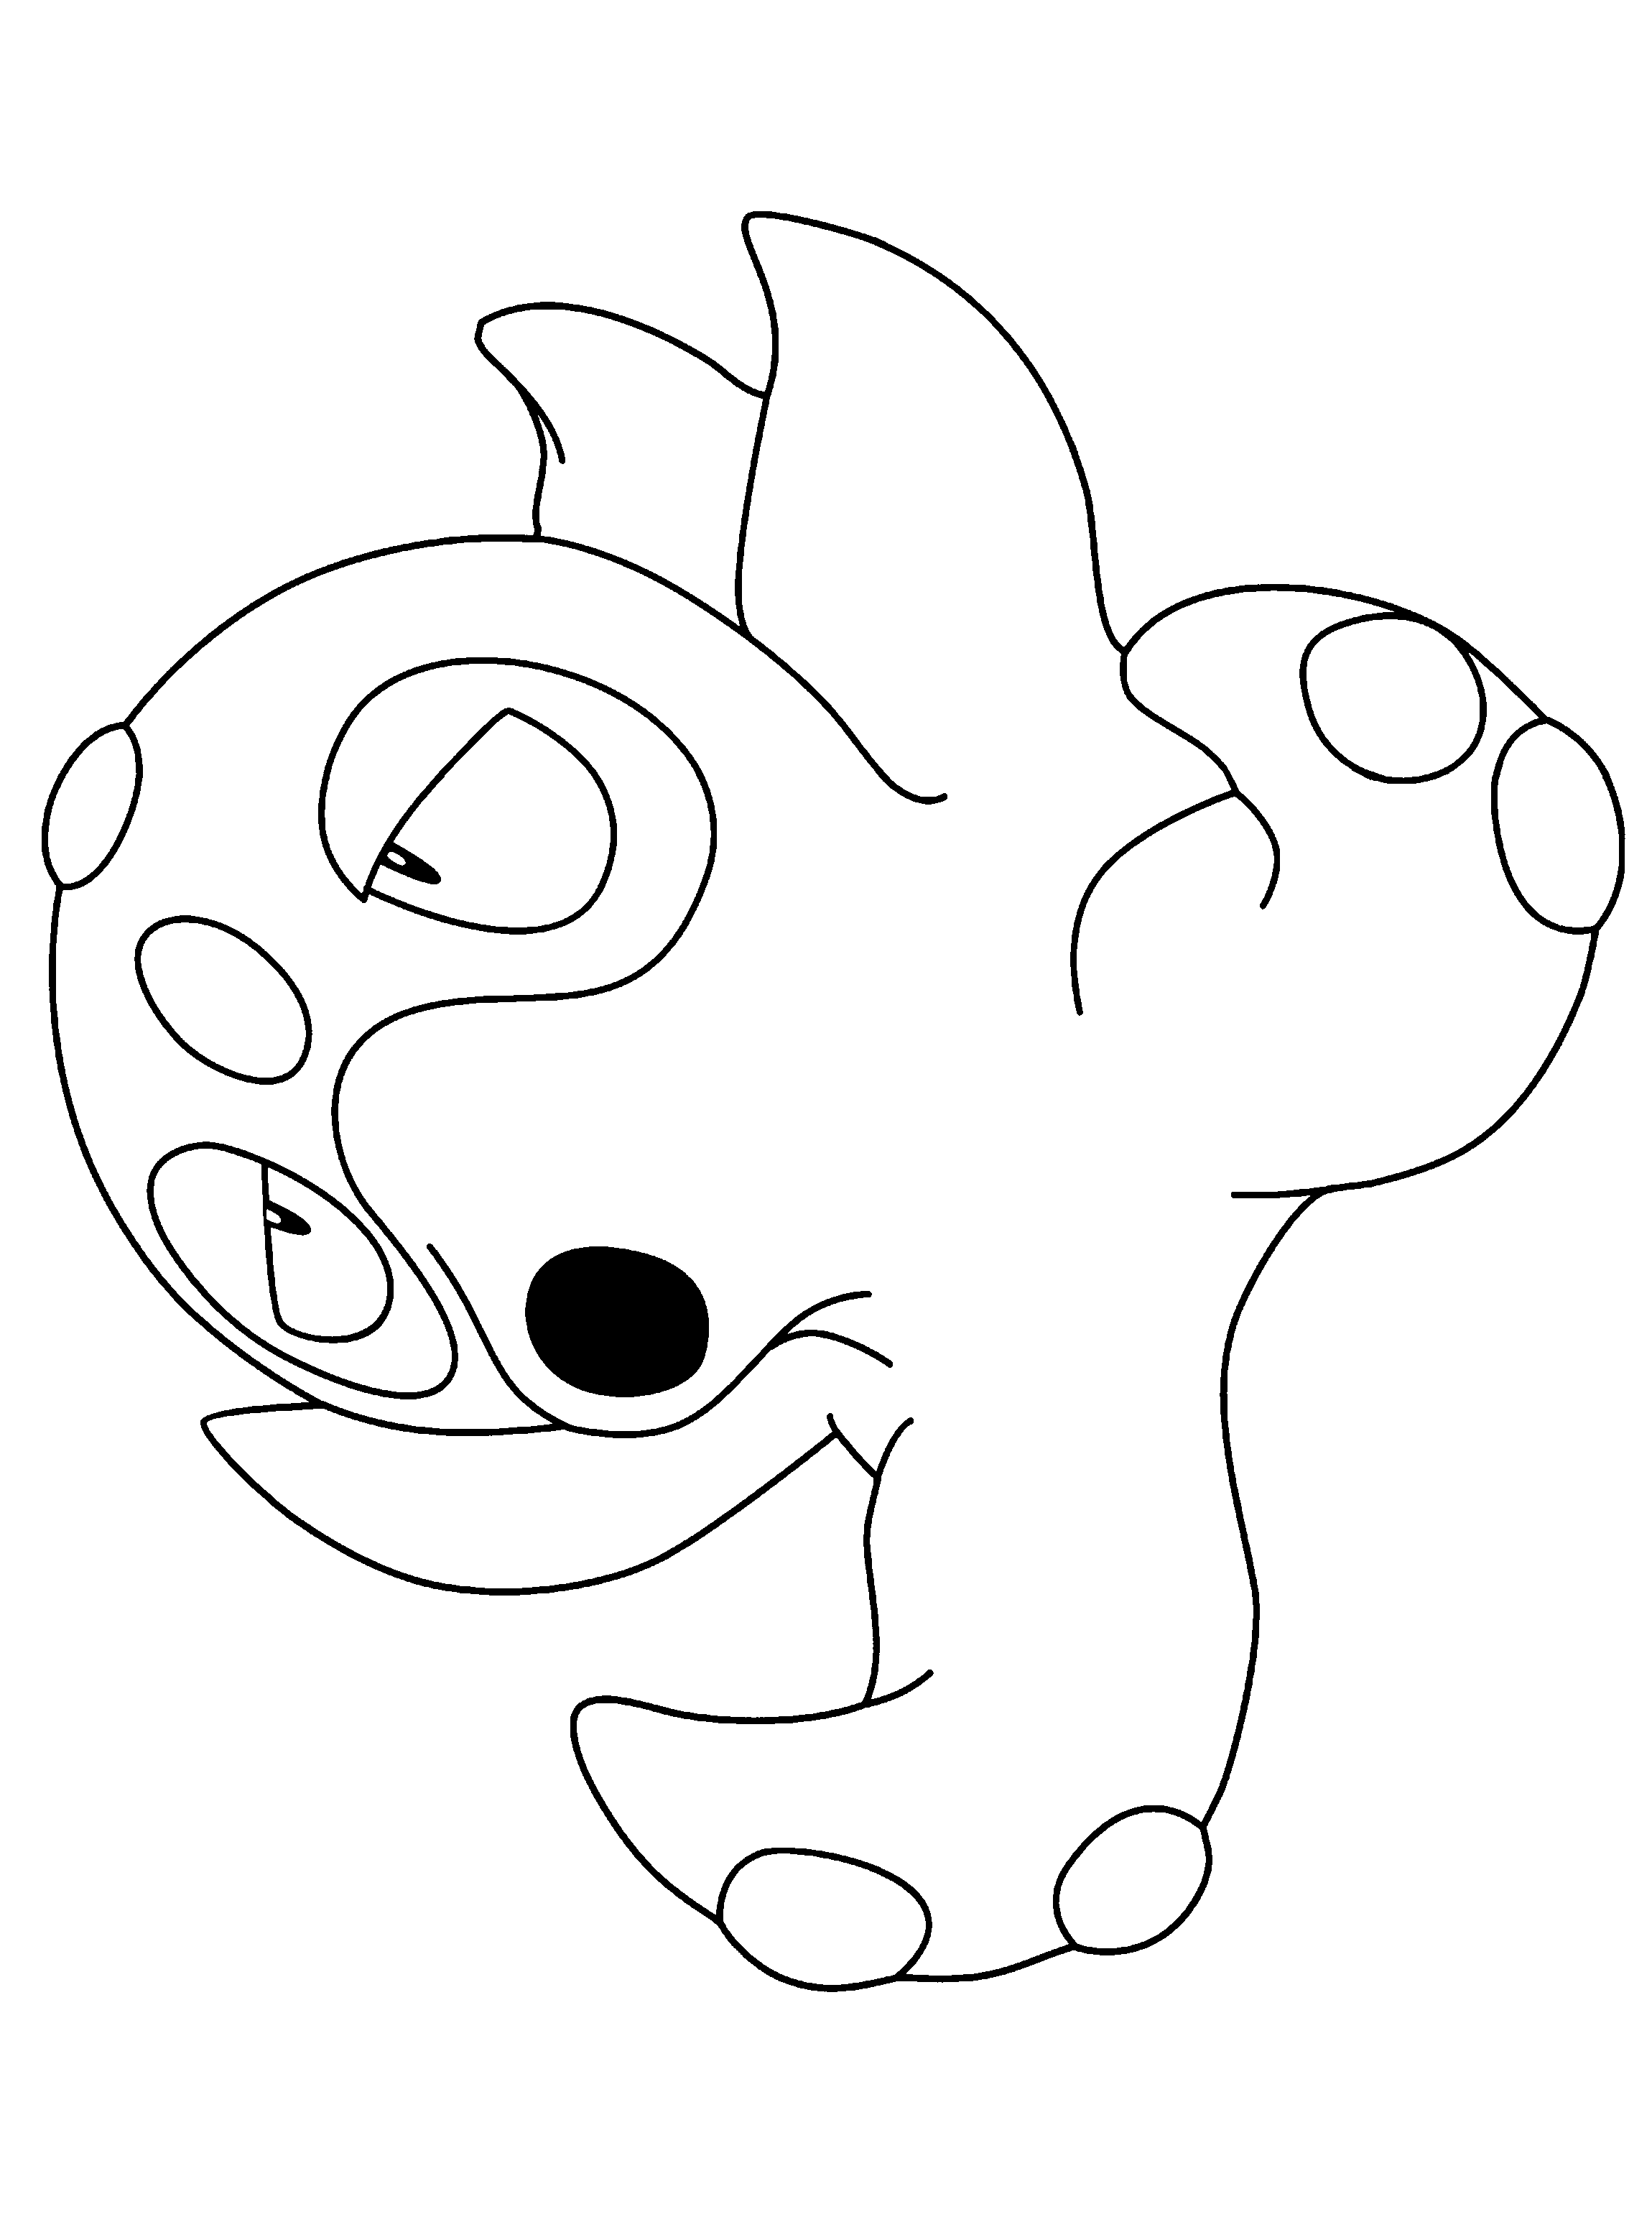 animated-coloring-pages-pokemon-image-0126